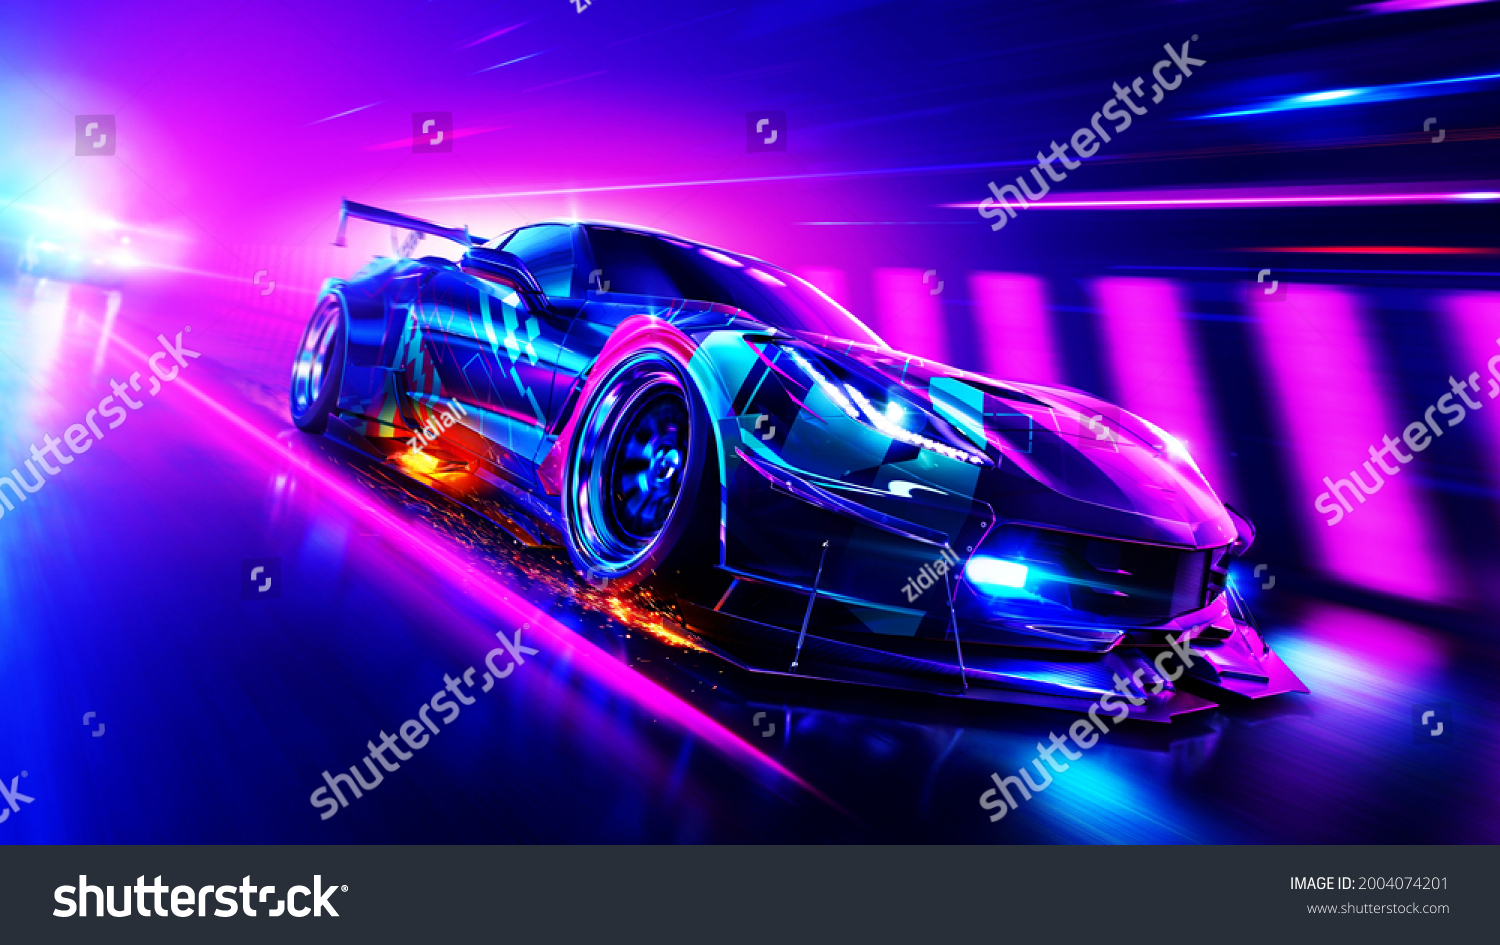 SVG of High speed luxury sport driving in the city - futuristic car concept (with grunge overlay) generic and brand less - 3d illustration svg